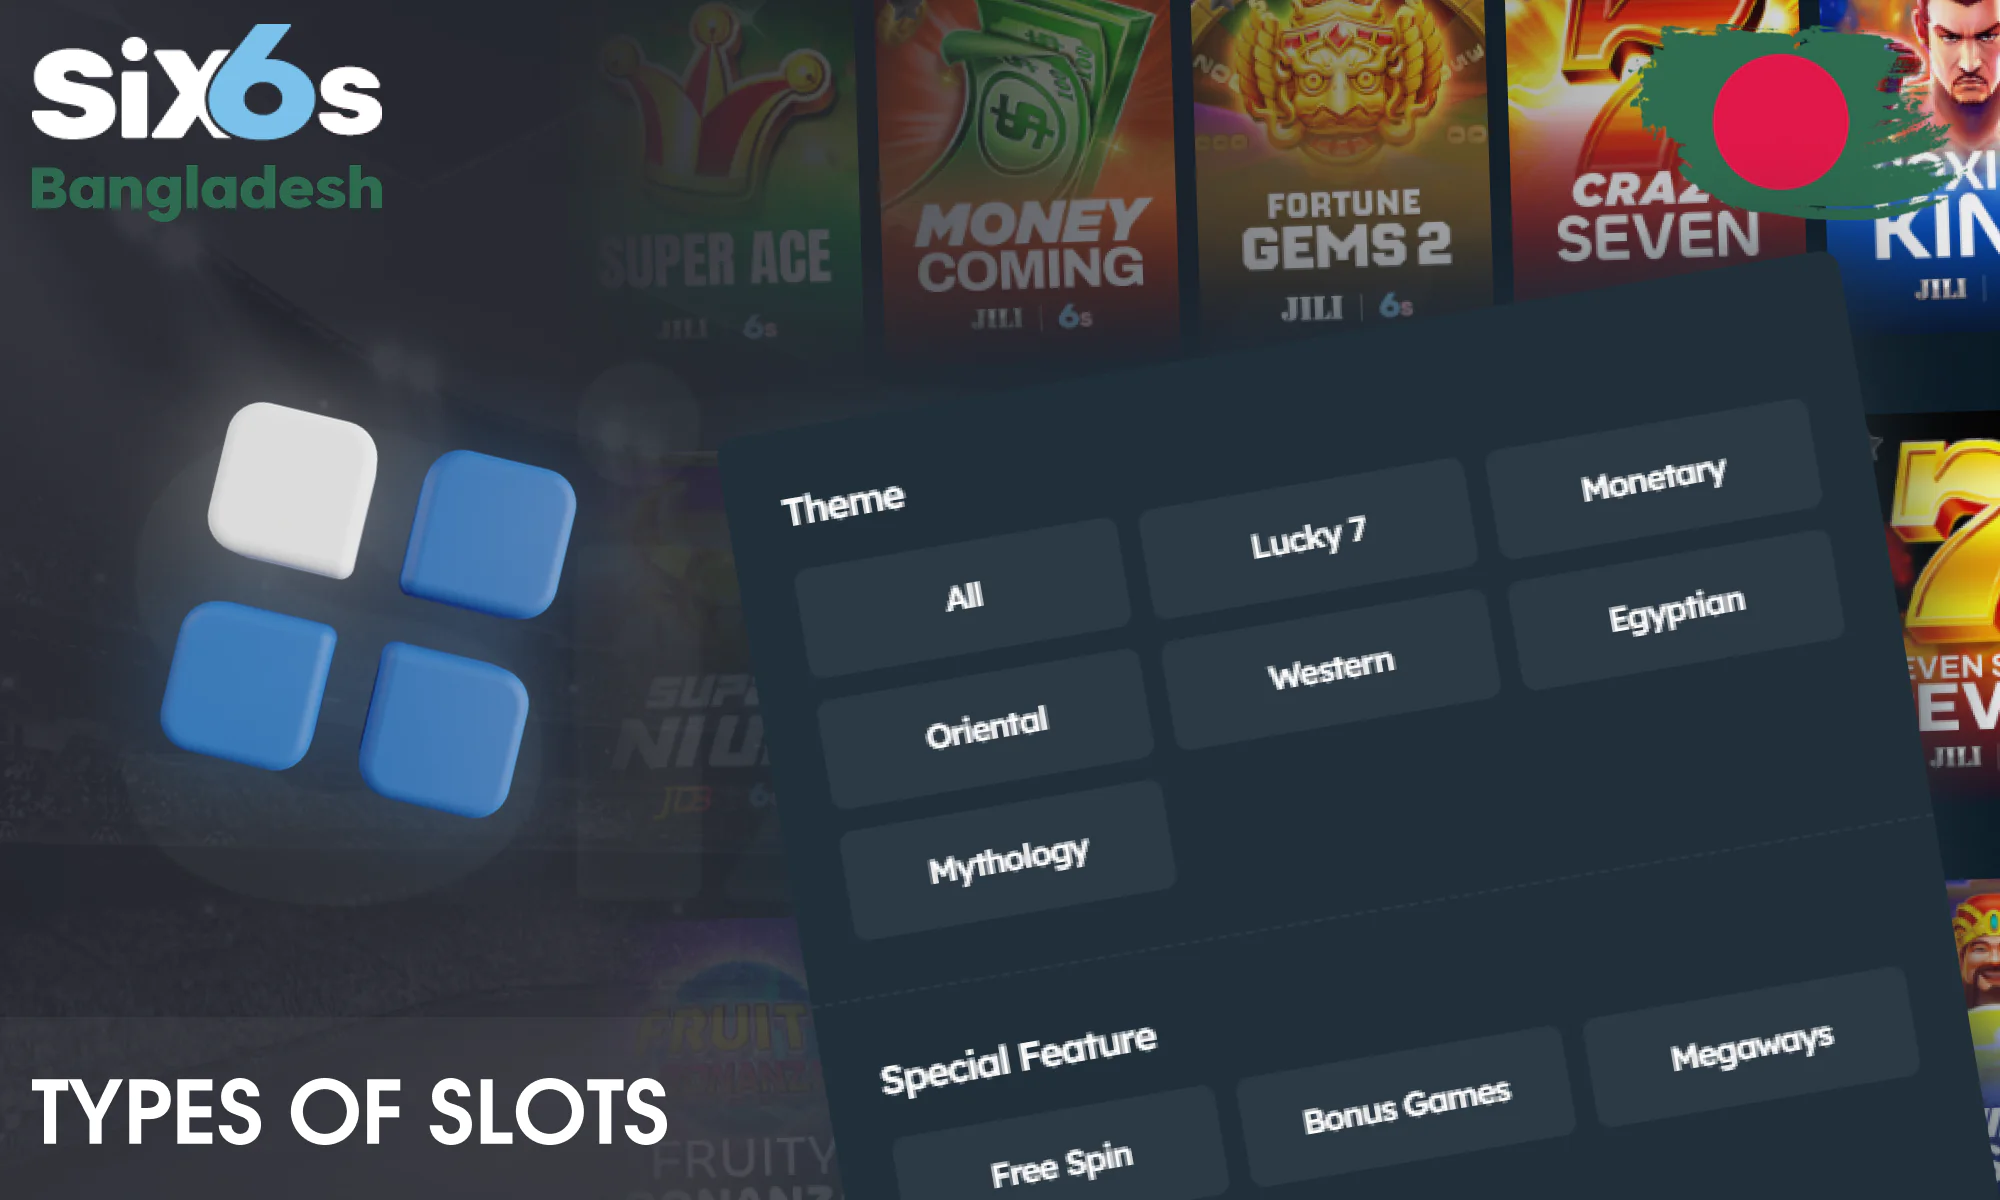 Six6s Casino offers different and unique types of slot machines